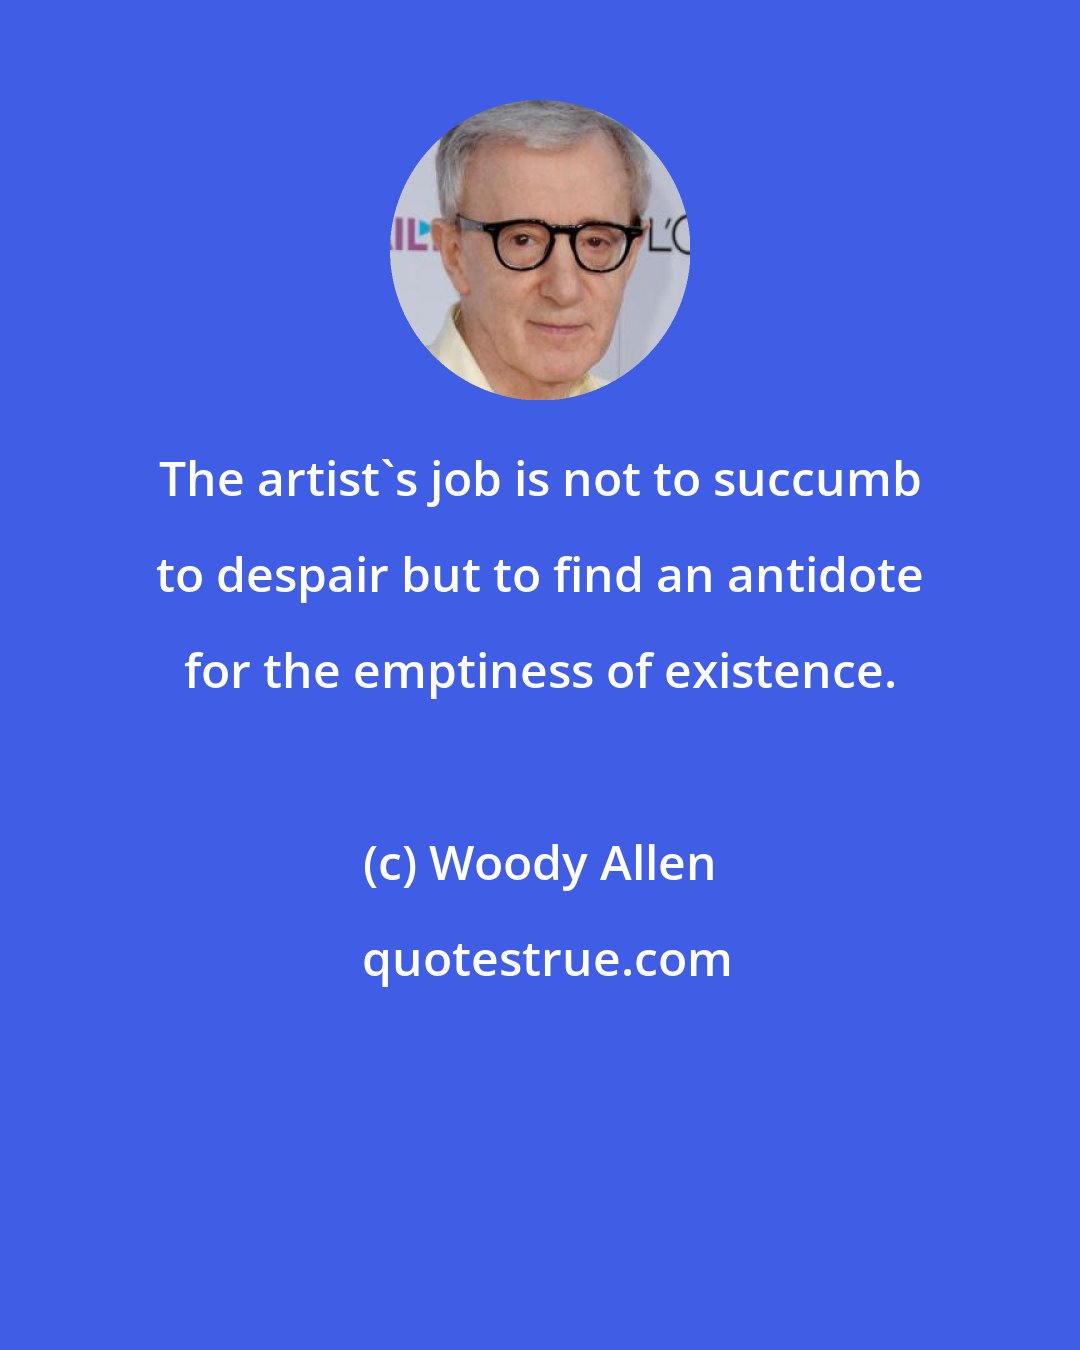 Woody Allen: The artist's job is not to succumb to despair but to find an antidote for the emptiness of existence.